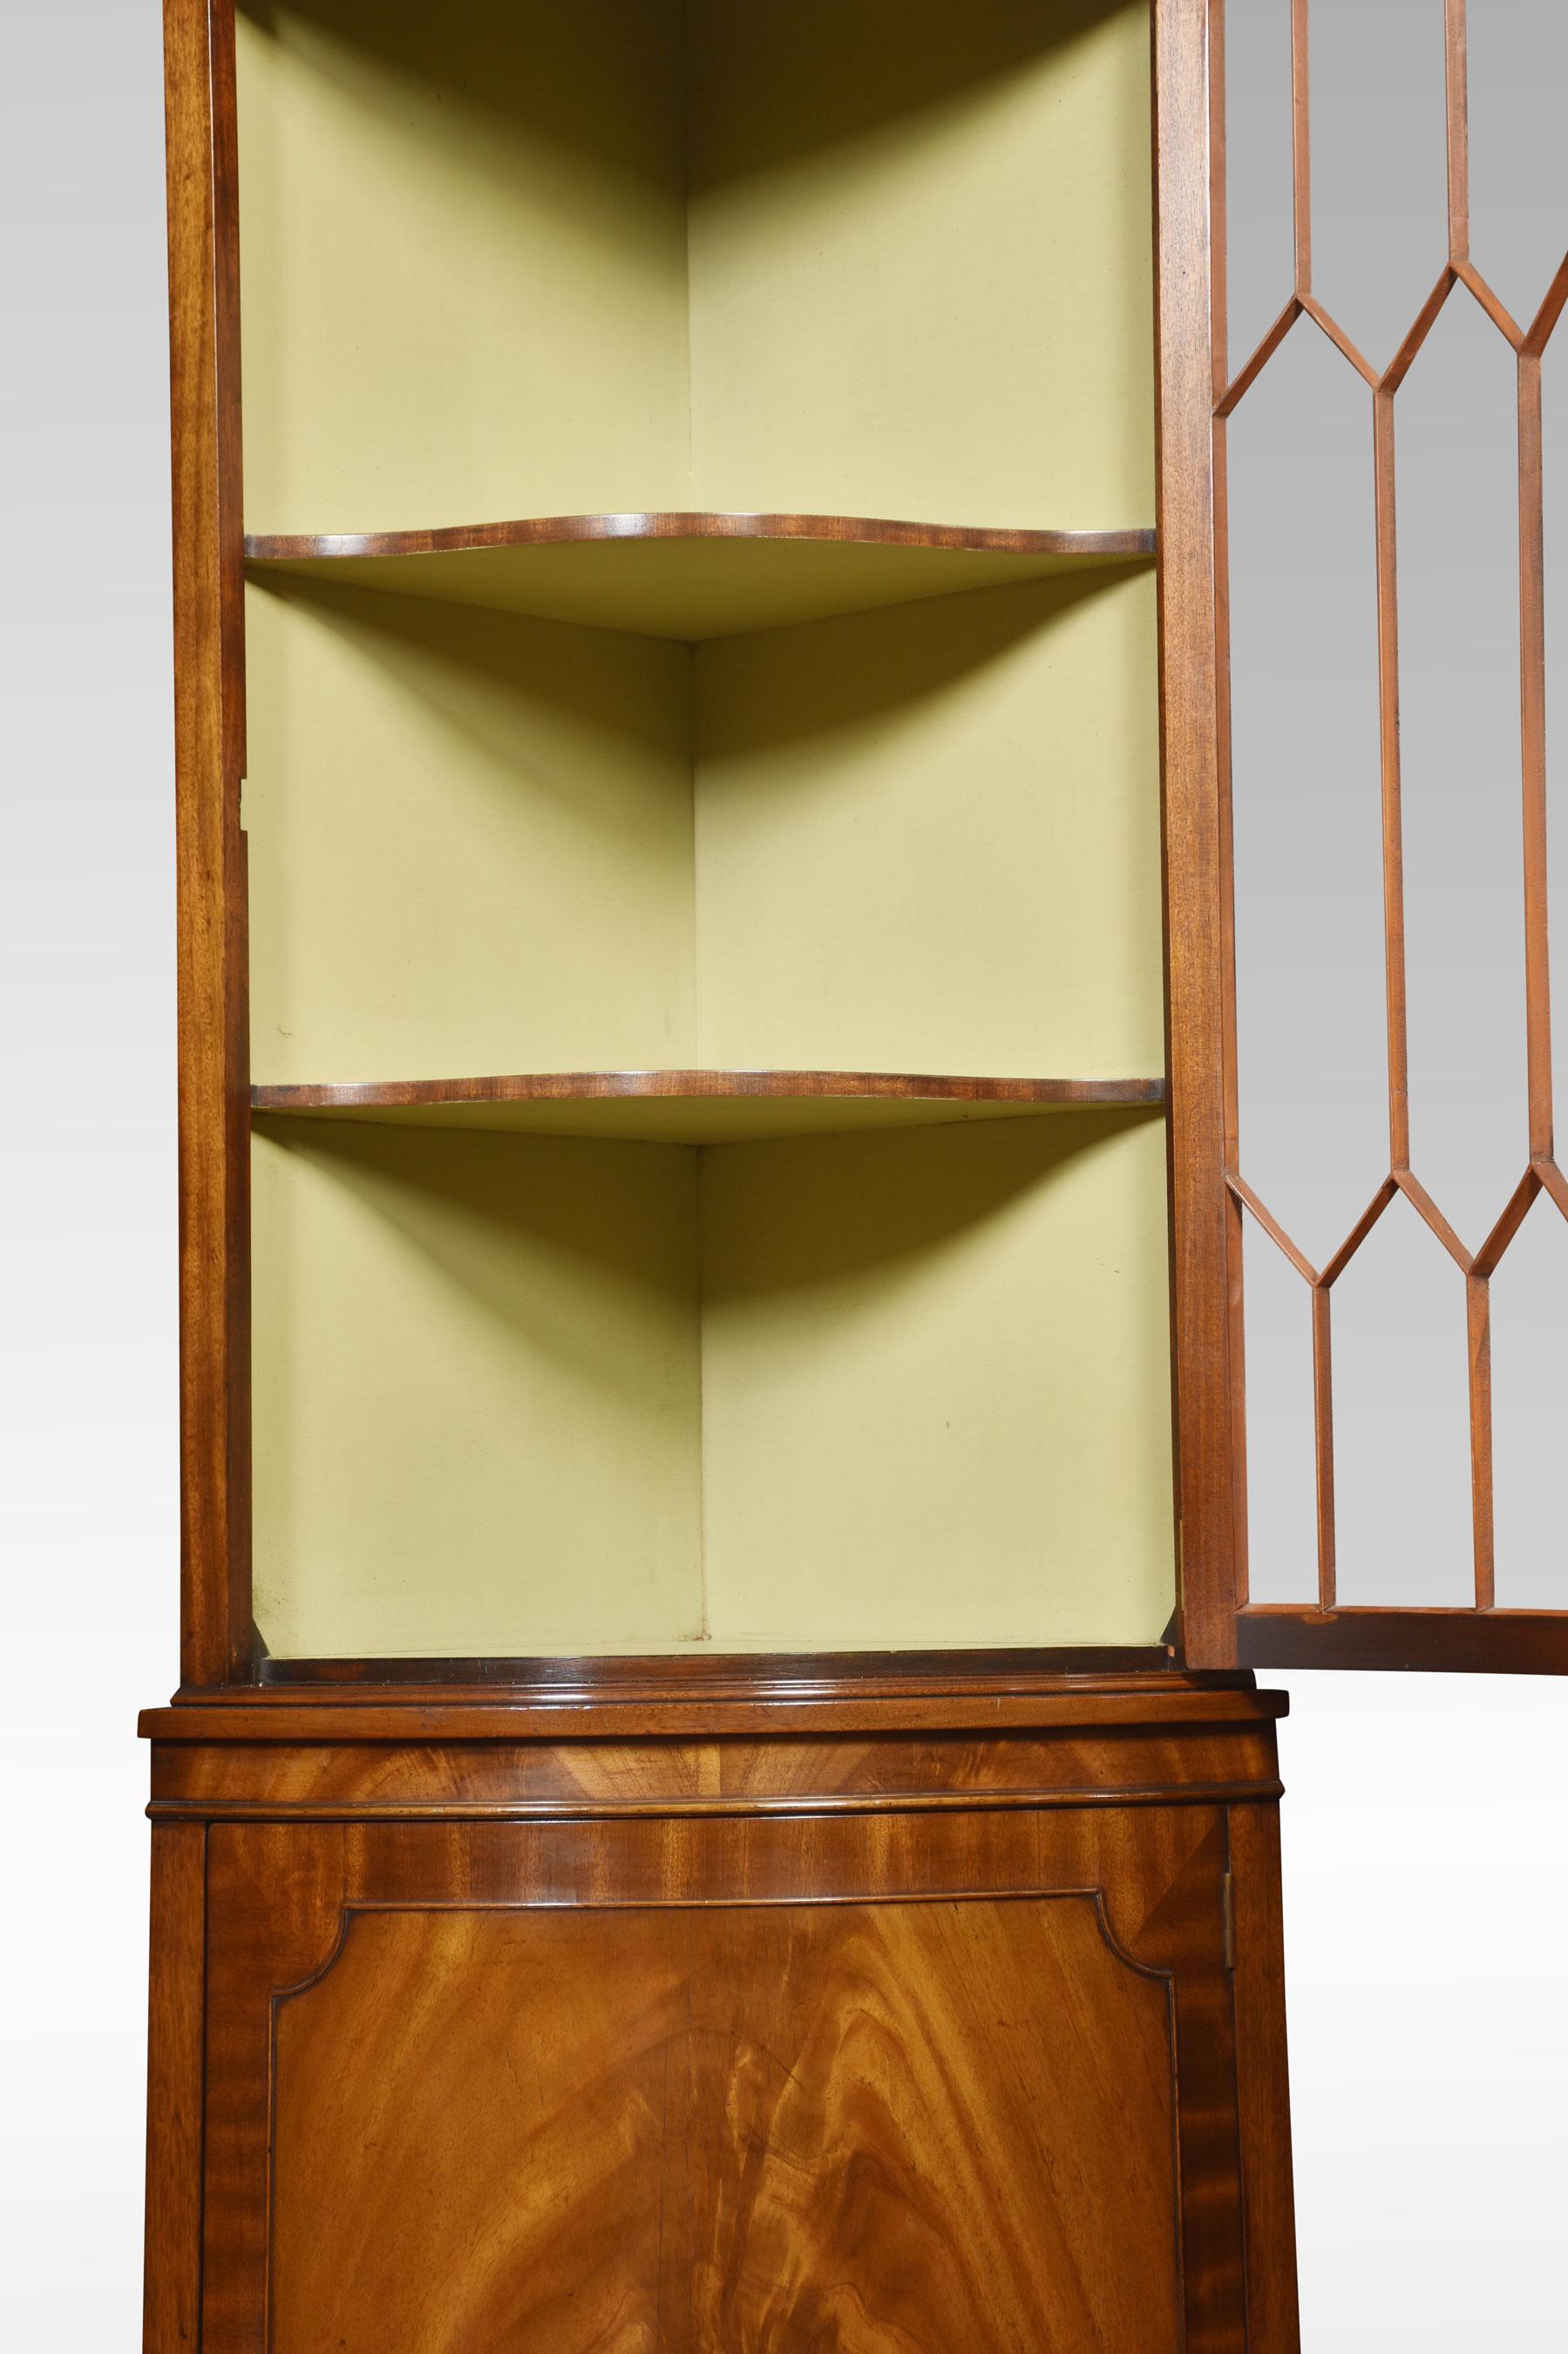 Mahogany standing corner cupboard, the bow-fronted astragal glazed doors opening to reveal two fixed shelves above a bow fronded flame mahogany panelled door, raised up on shaped bracket feet.
Dimensions
Height 75 Inches
Width 26 Inches
Depth 18